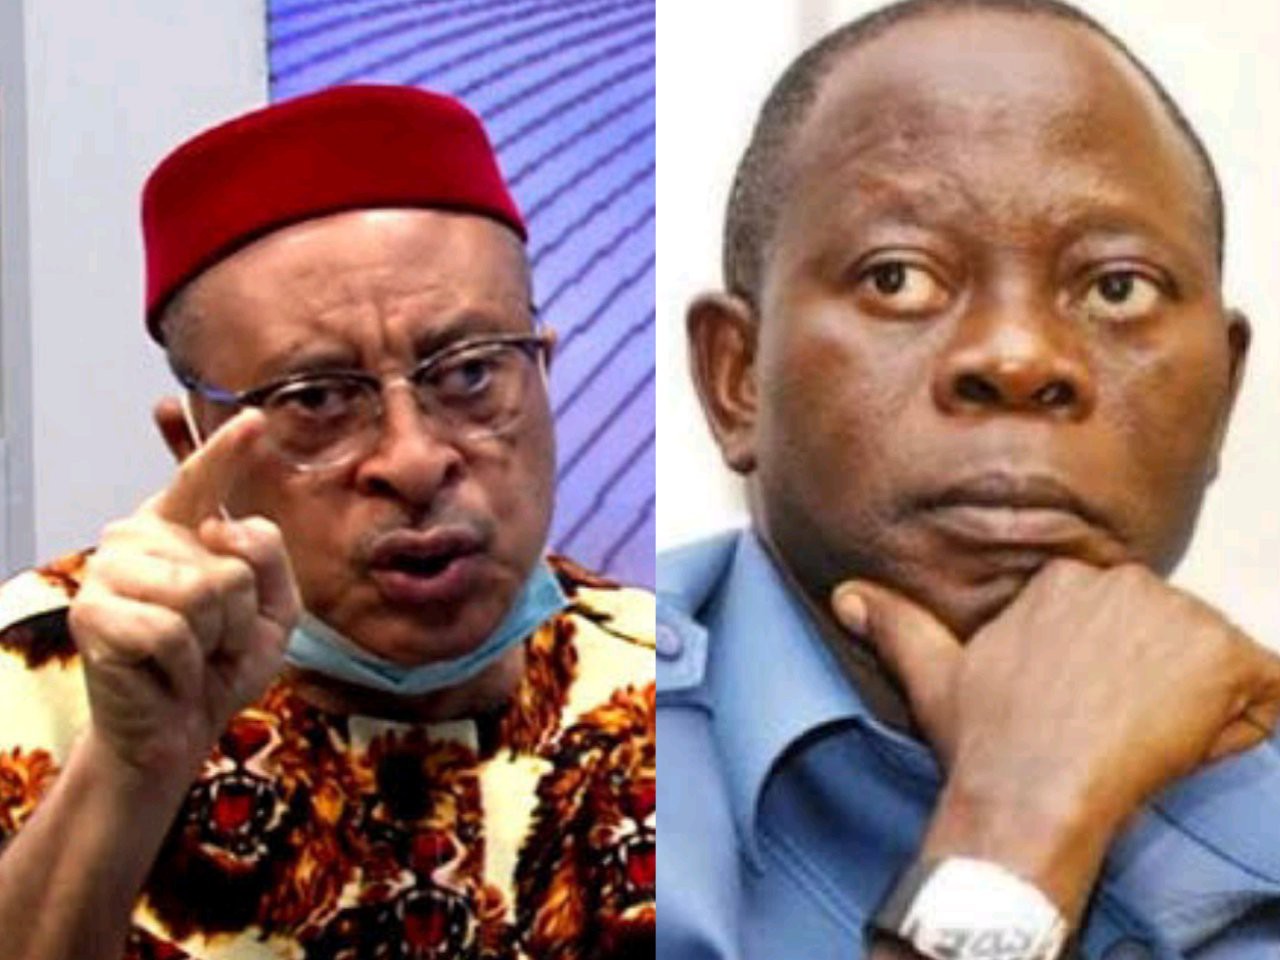 Utomi said. 'If You Call This A Crisis, What Will You Call How APC Removed Adams Oshiomhole As Chairman?'